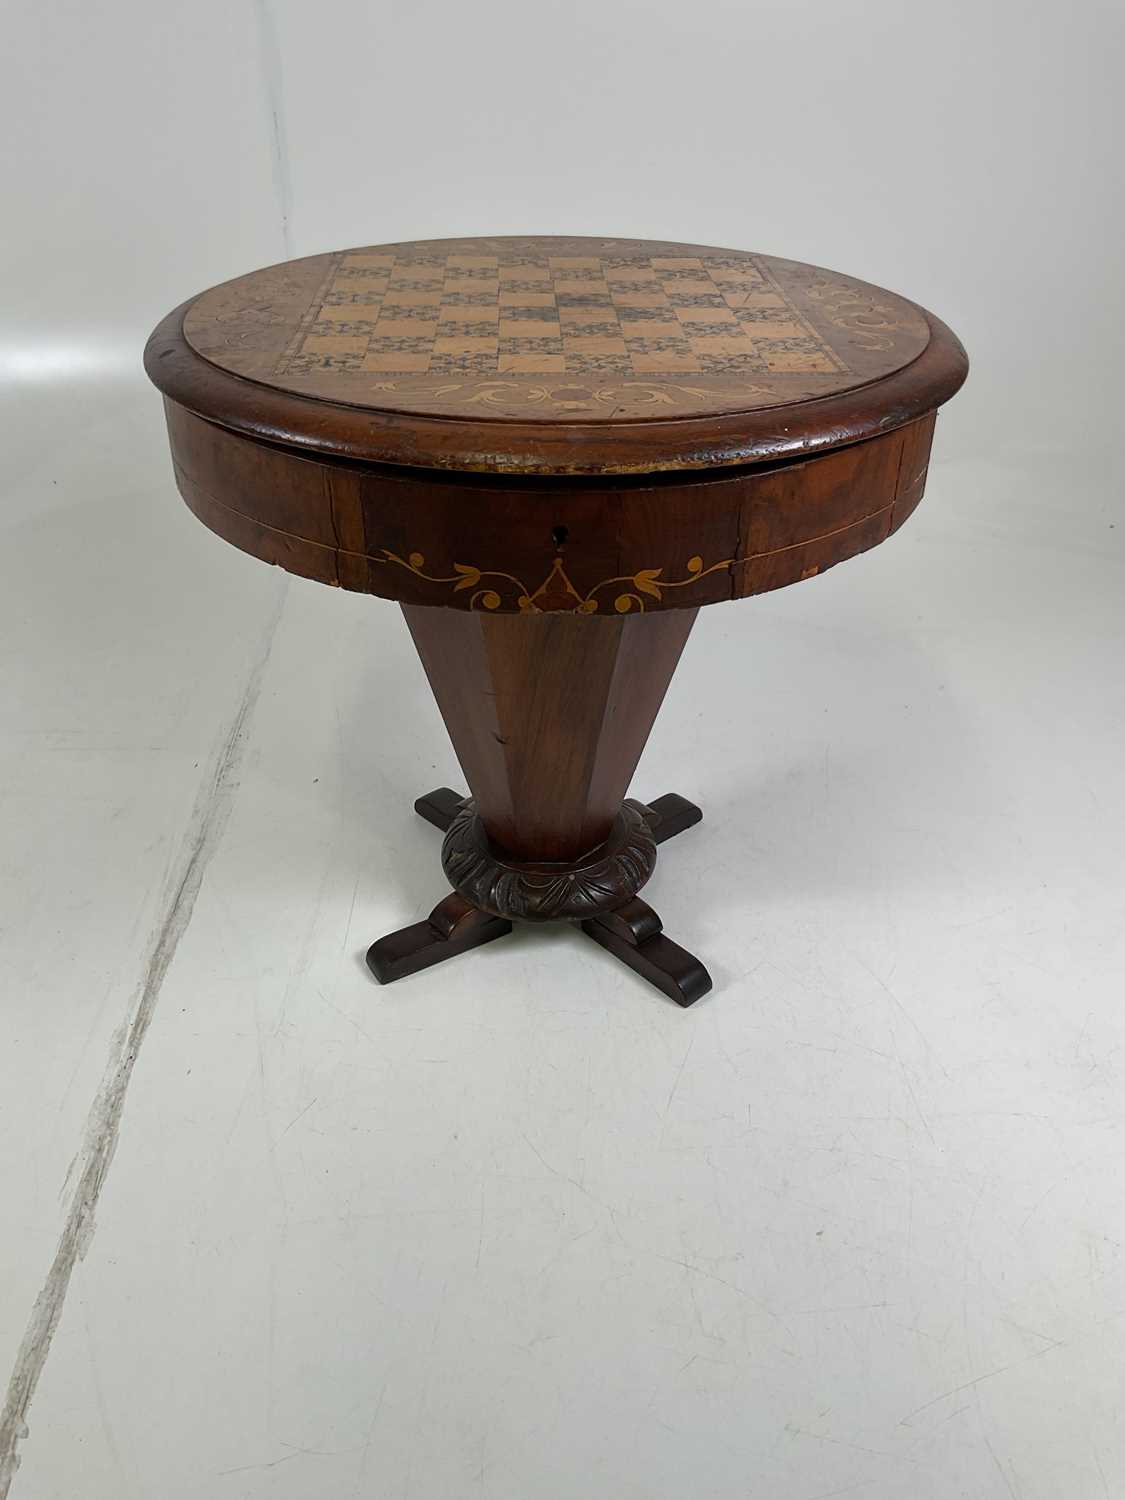 A trumpet sewing table, height 44 cm, diameter 47cm, incorporating a chessboard inlaid on top.